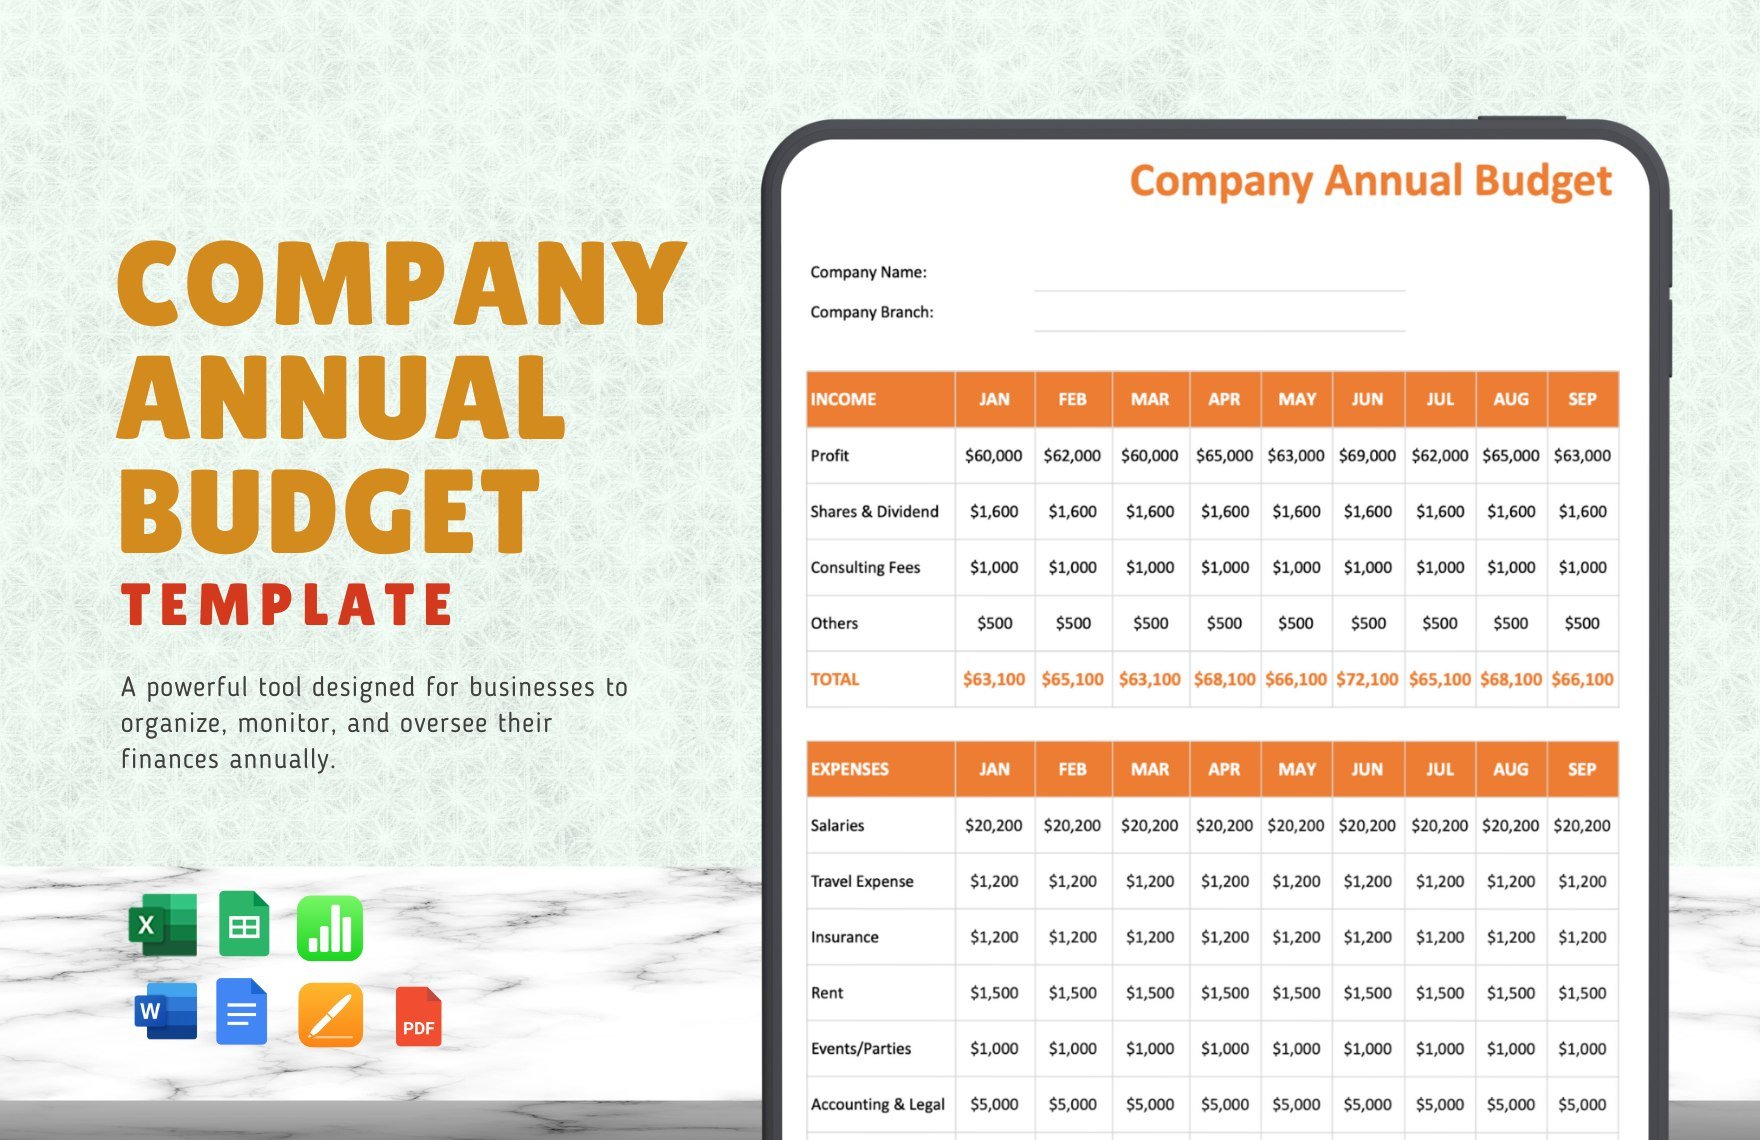 Company Annual Budget Template